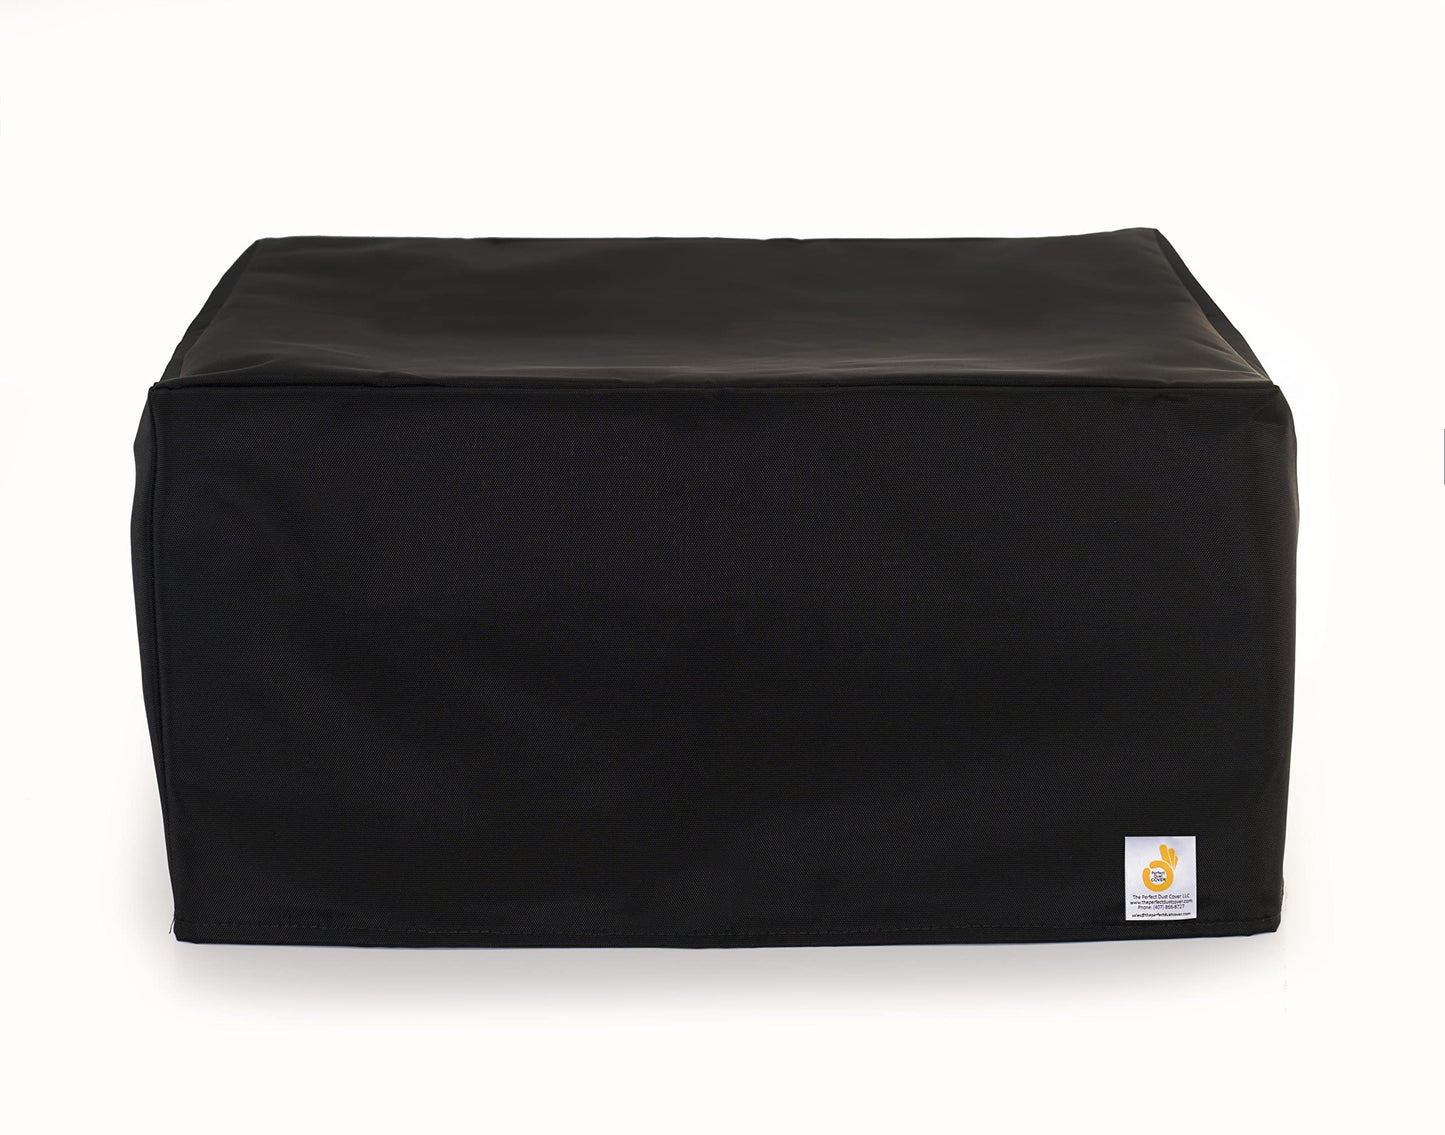 The Perfect Dust Cover, Black Nylon Cover Compatible with Lexmark Color MC3326adwe and Lexmark Color MC3326i Laser Printers, Double-Stitched and Waterproof by The Perfect Dust Cover LLC